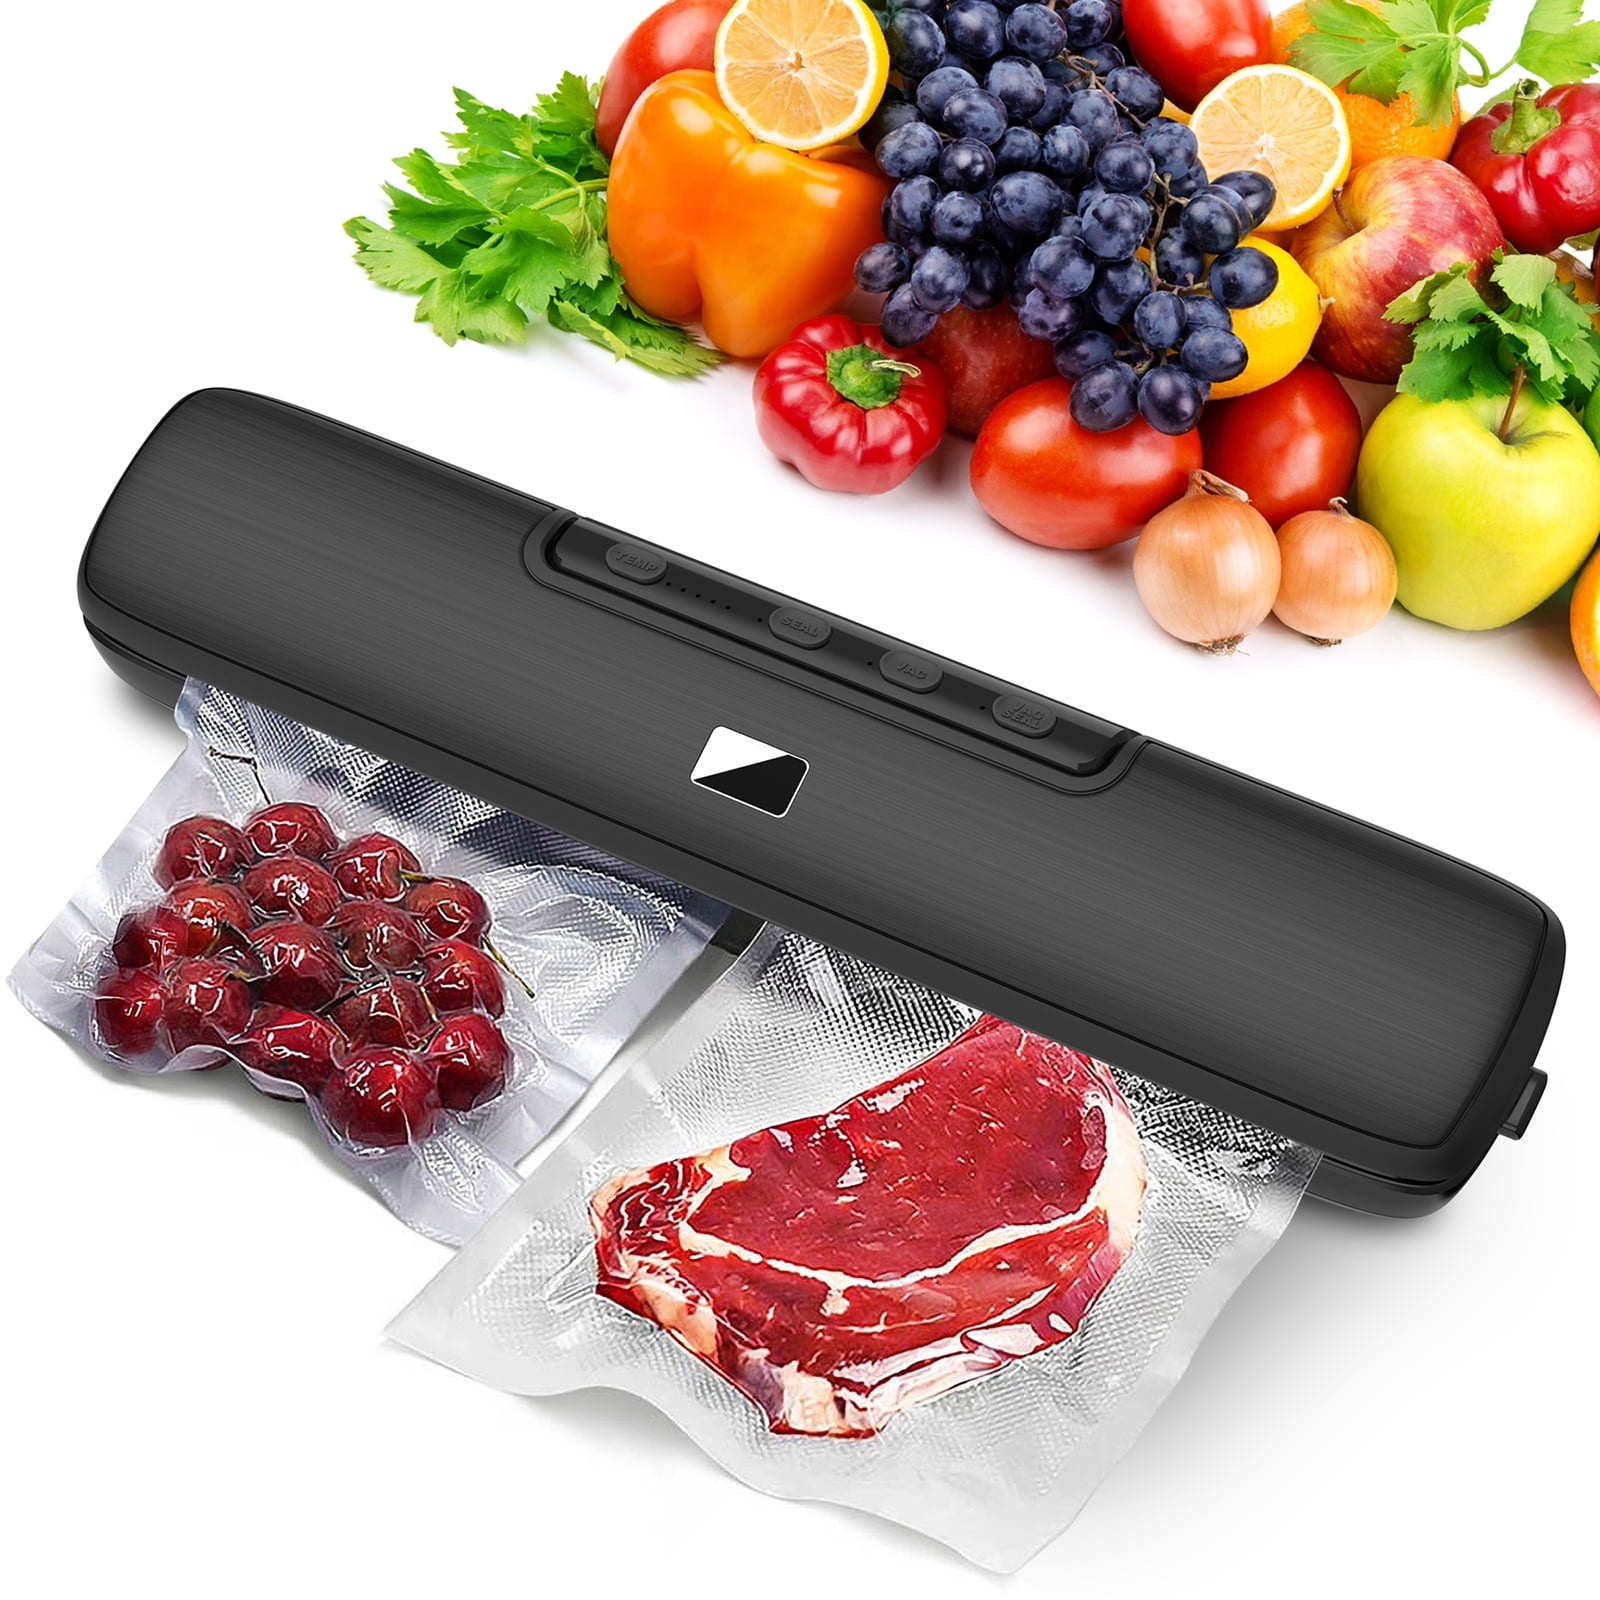  Vacuum Sealer Machine with 55 Count 8x12 Food Sealers Bags  and 8*79' Vacuum Sealer Roll, Inkbird Automatic Vacuum Sealers Machine  with Built-in Cutter, Dry & Moist Sealing Modes for Food Storage 